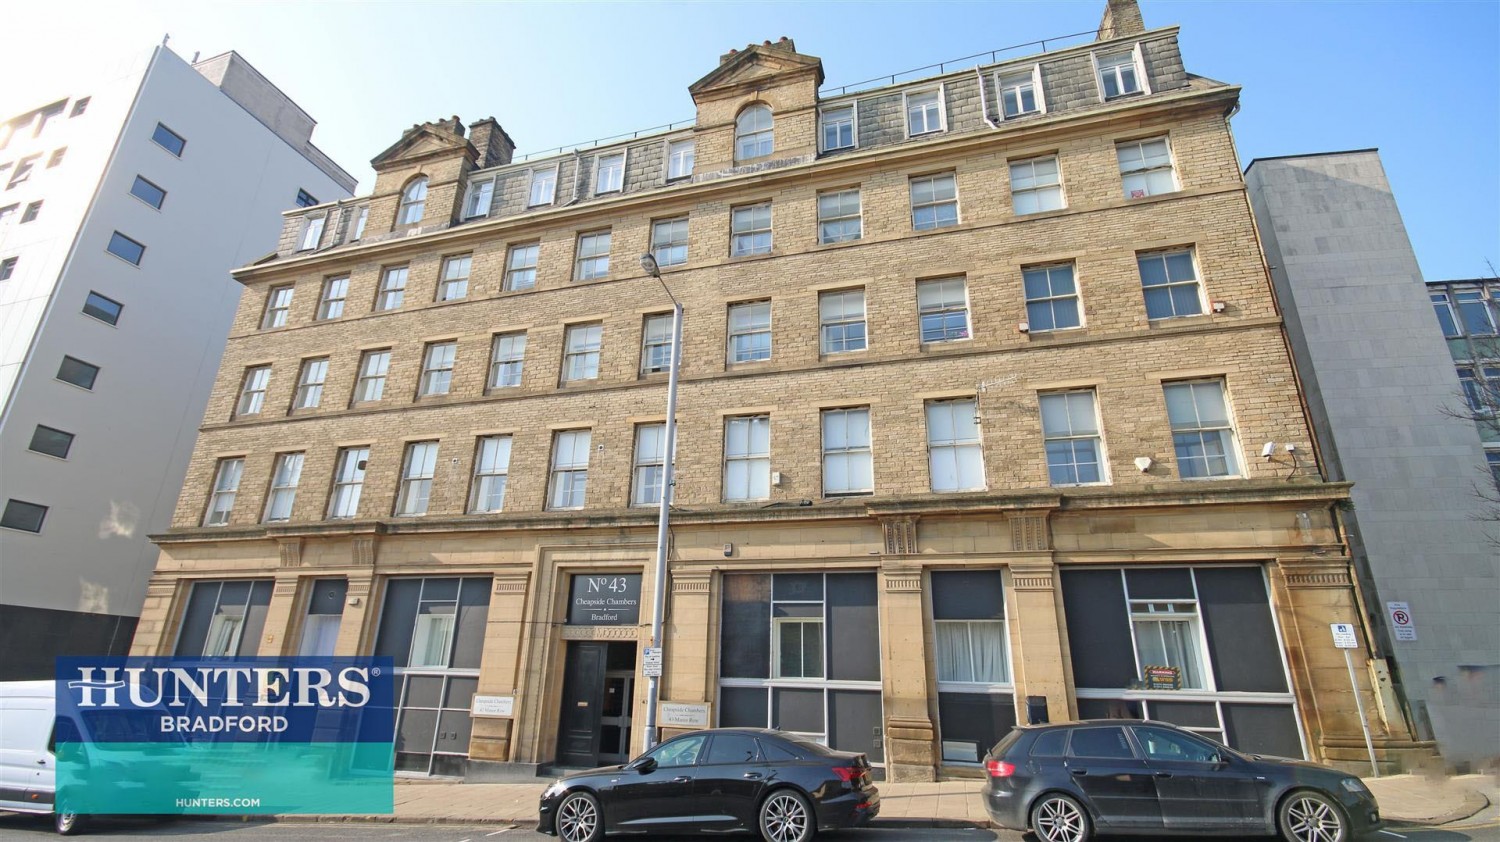 Cheapside Chambers Cheapside, Bradford, West Yorkshire, BD1 4HP